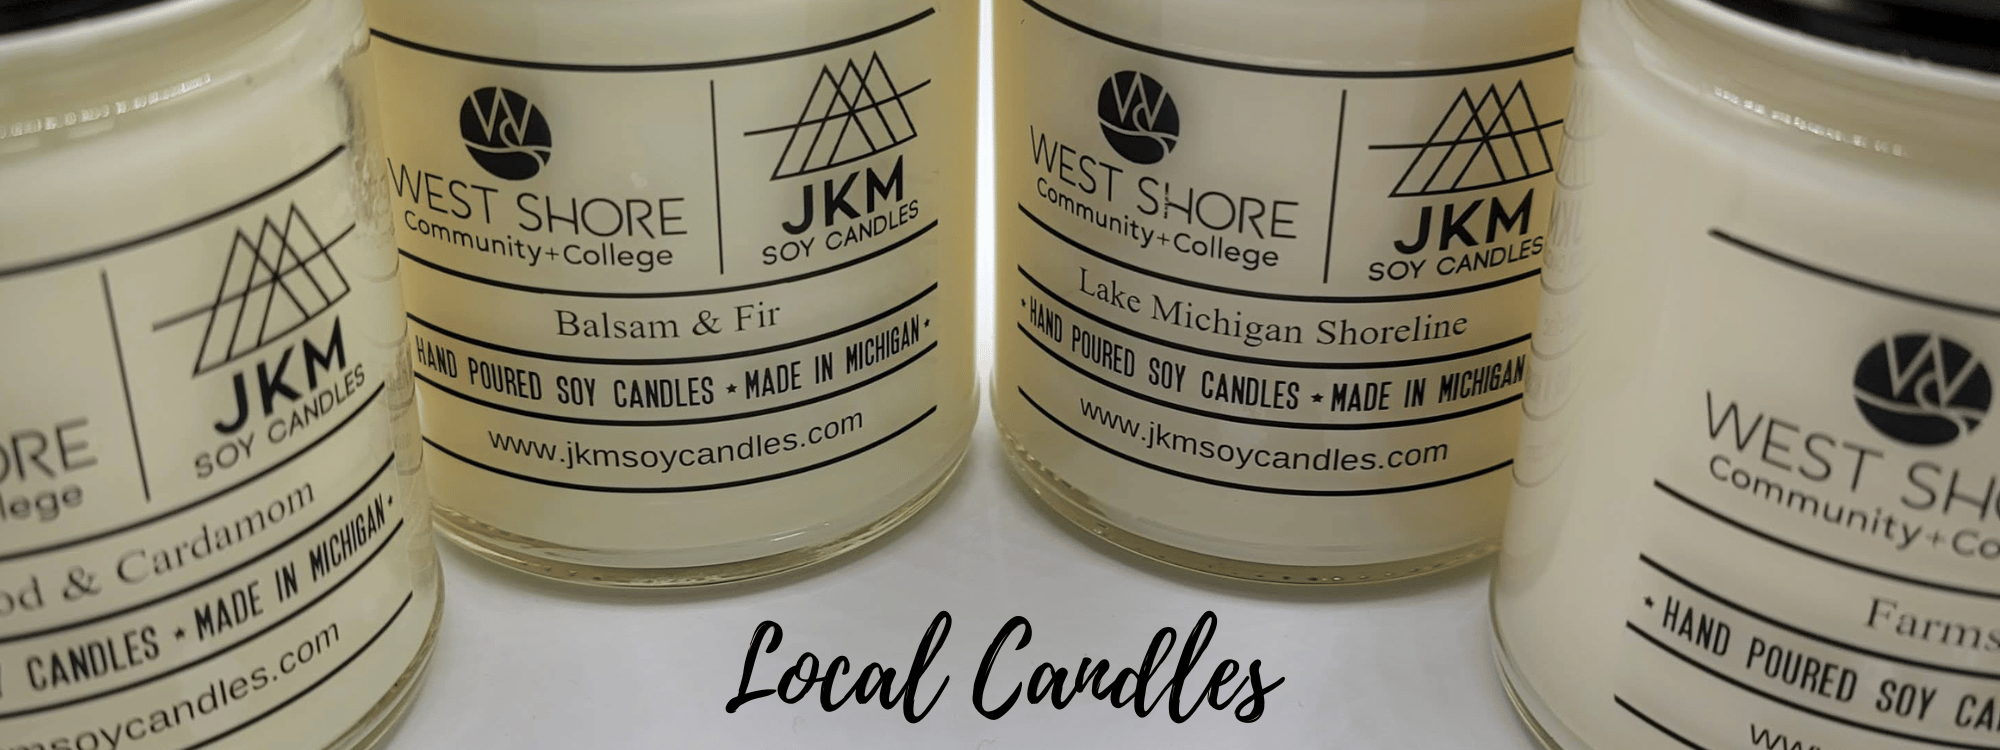 Local Candles